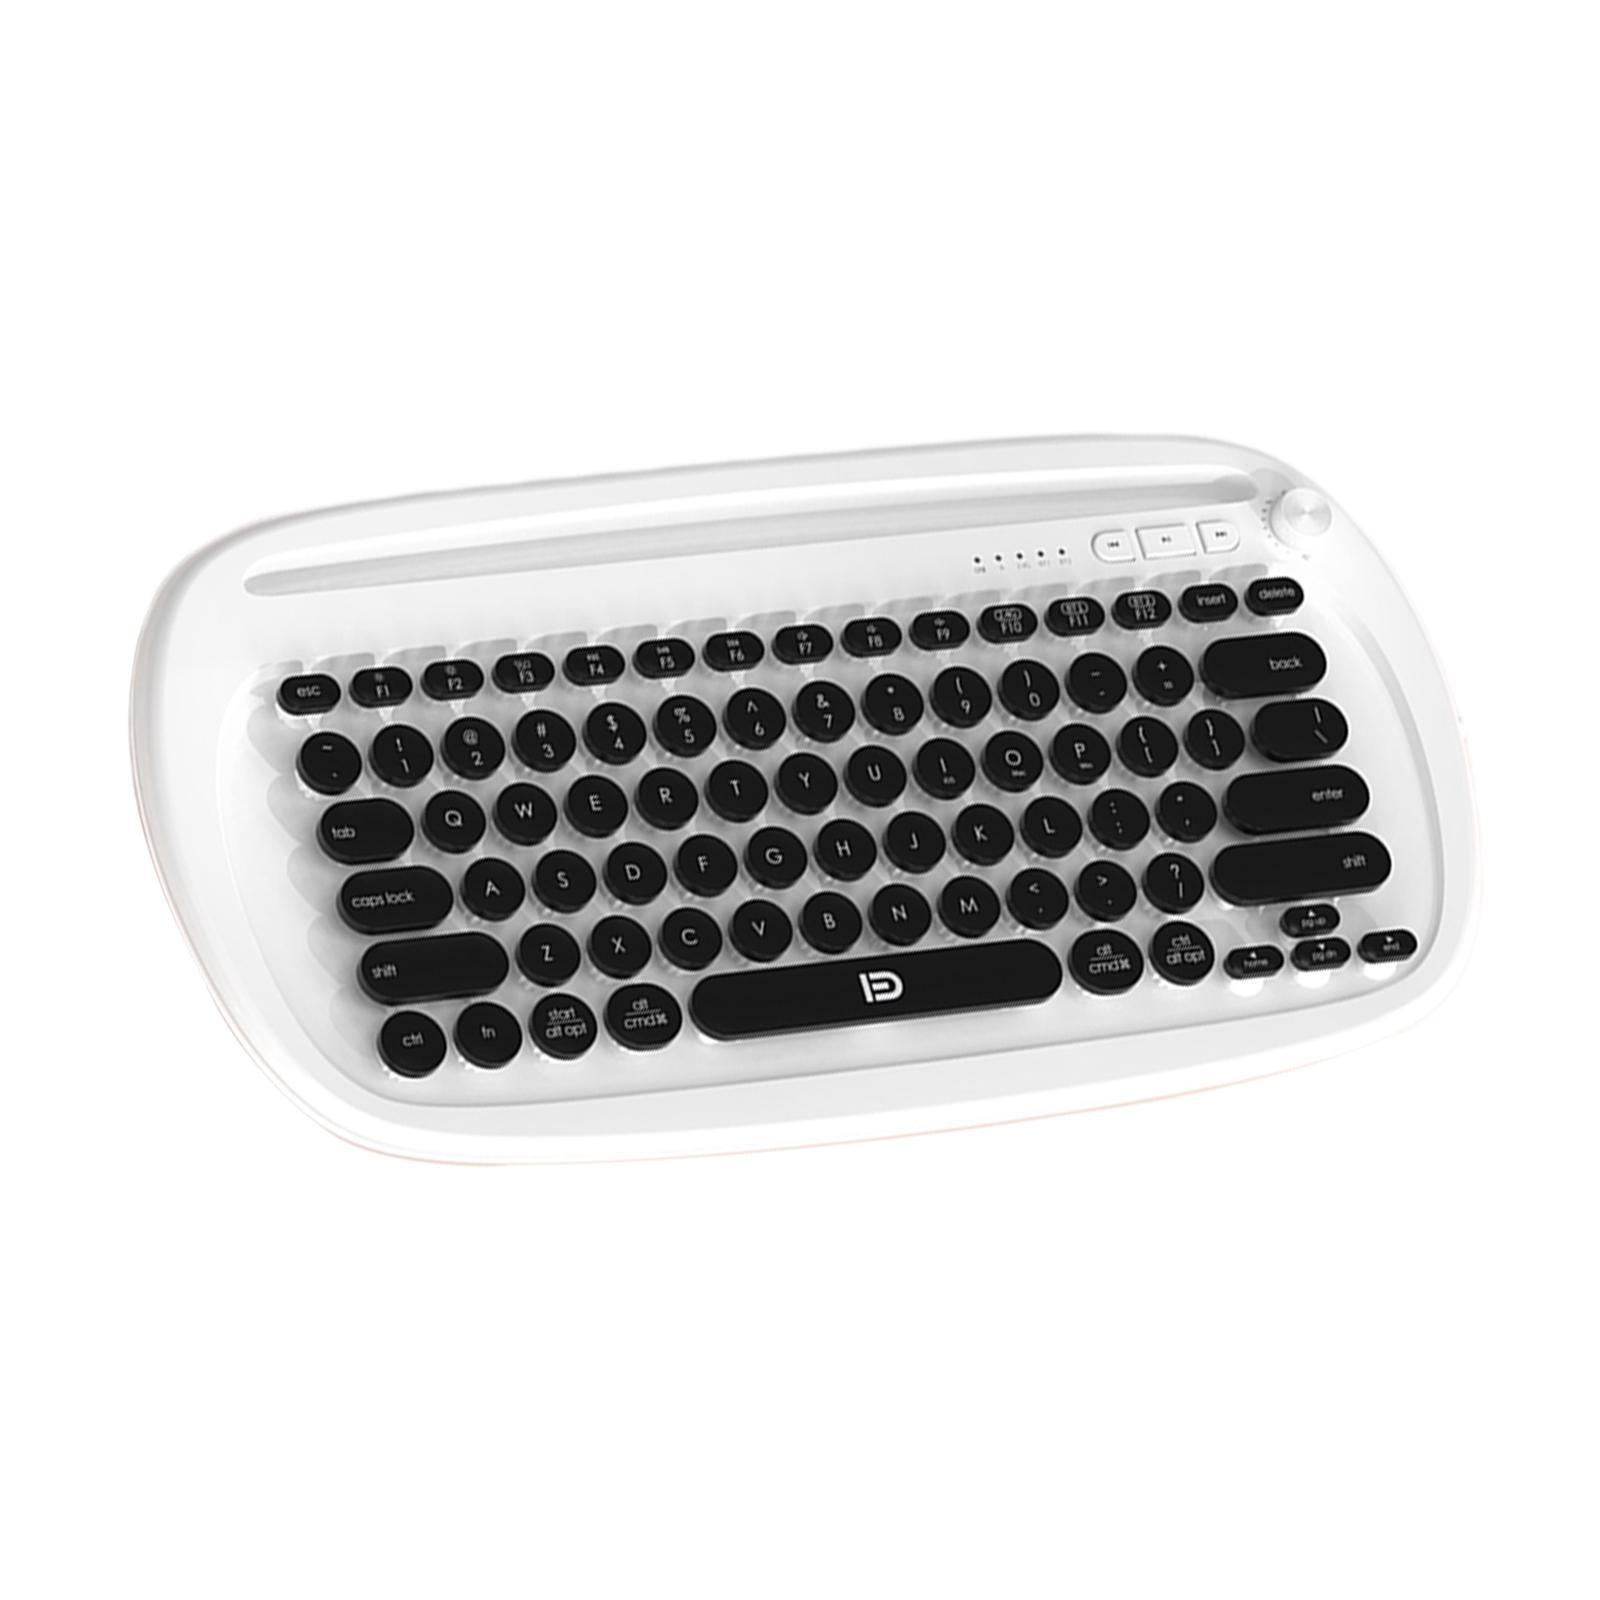 79 Keys Wireless Bluetooth Keyboard Compact for Gaming Office